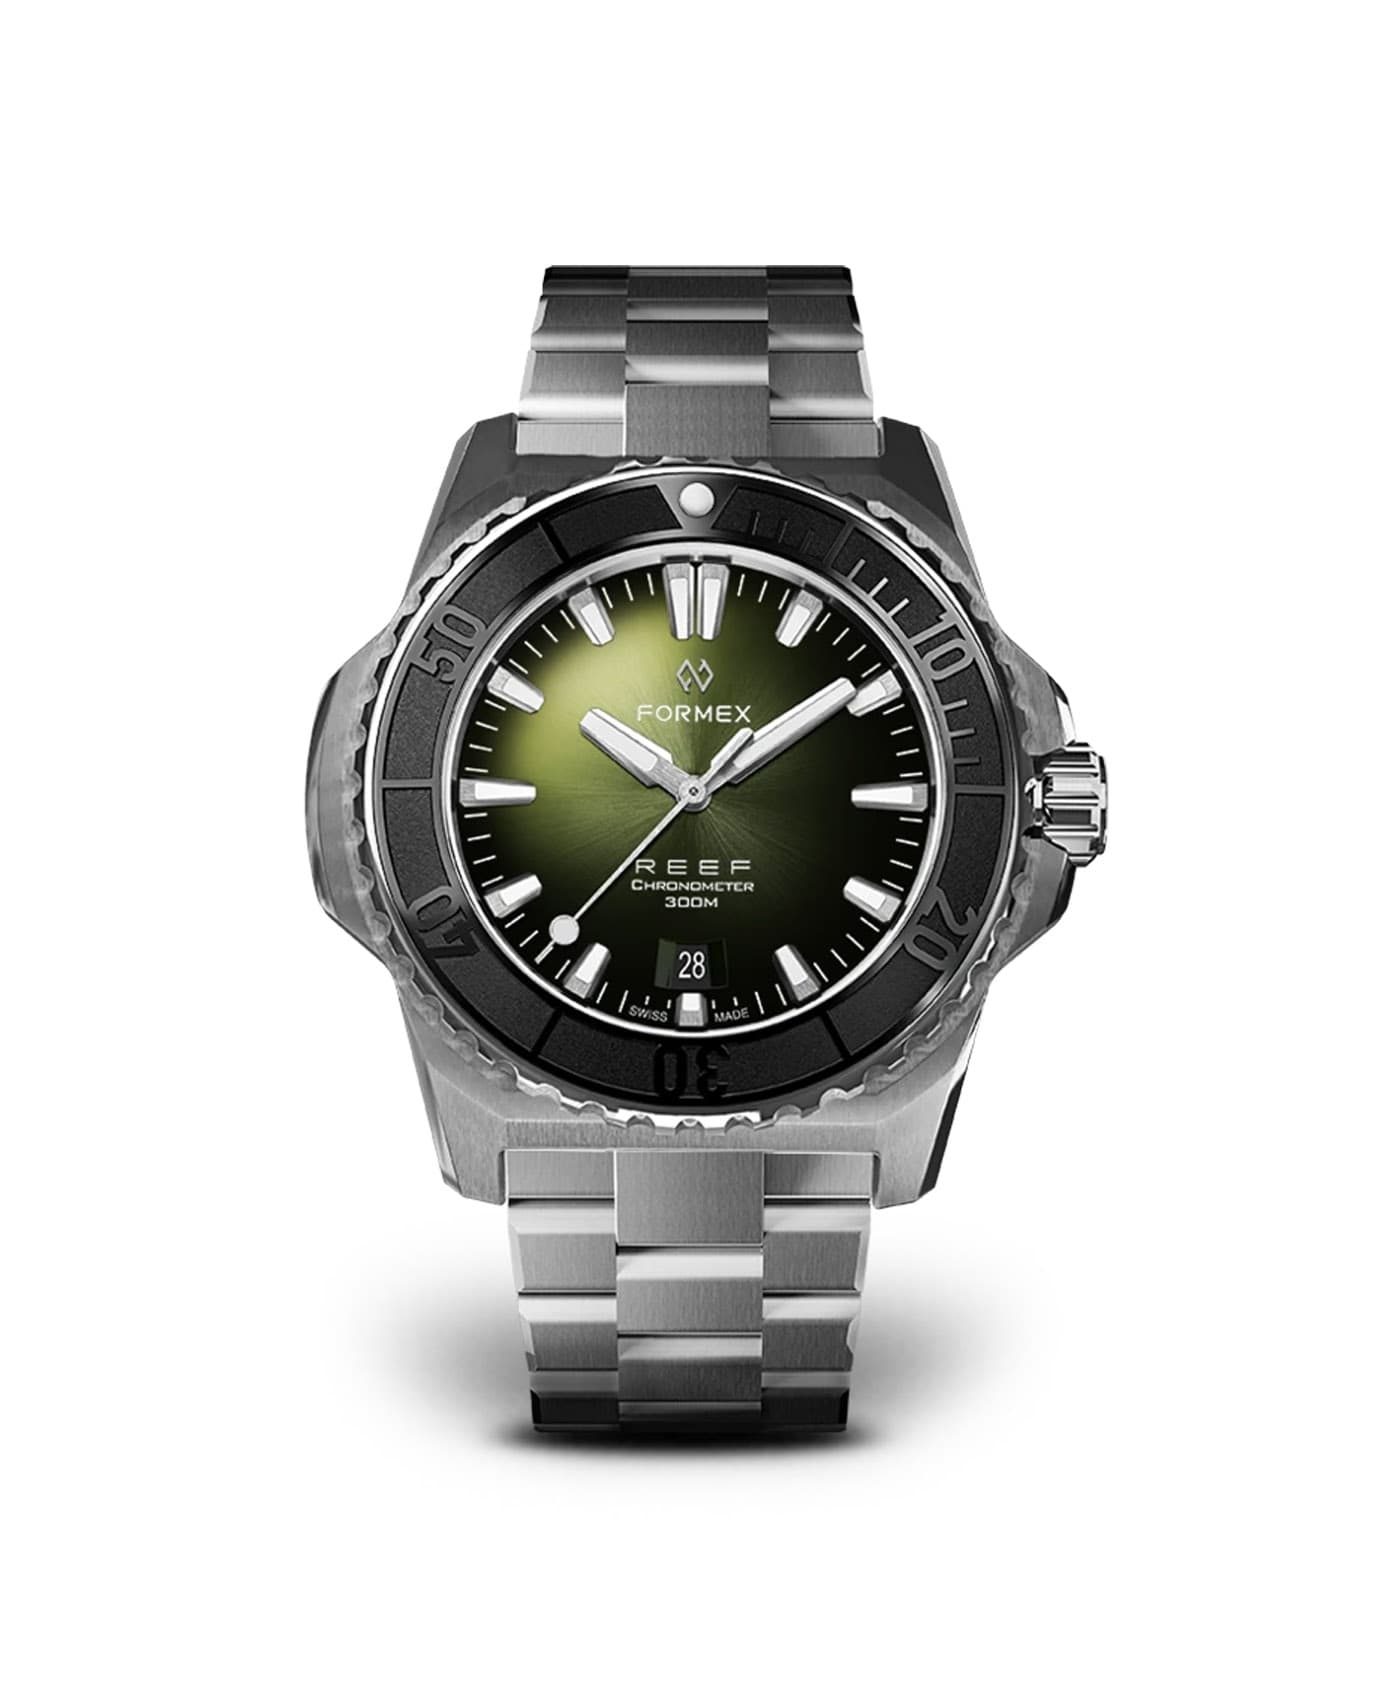 Formex - Reef - Automatic Chronometer COSC 300m_Green Dial Black Bezel